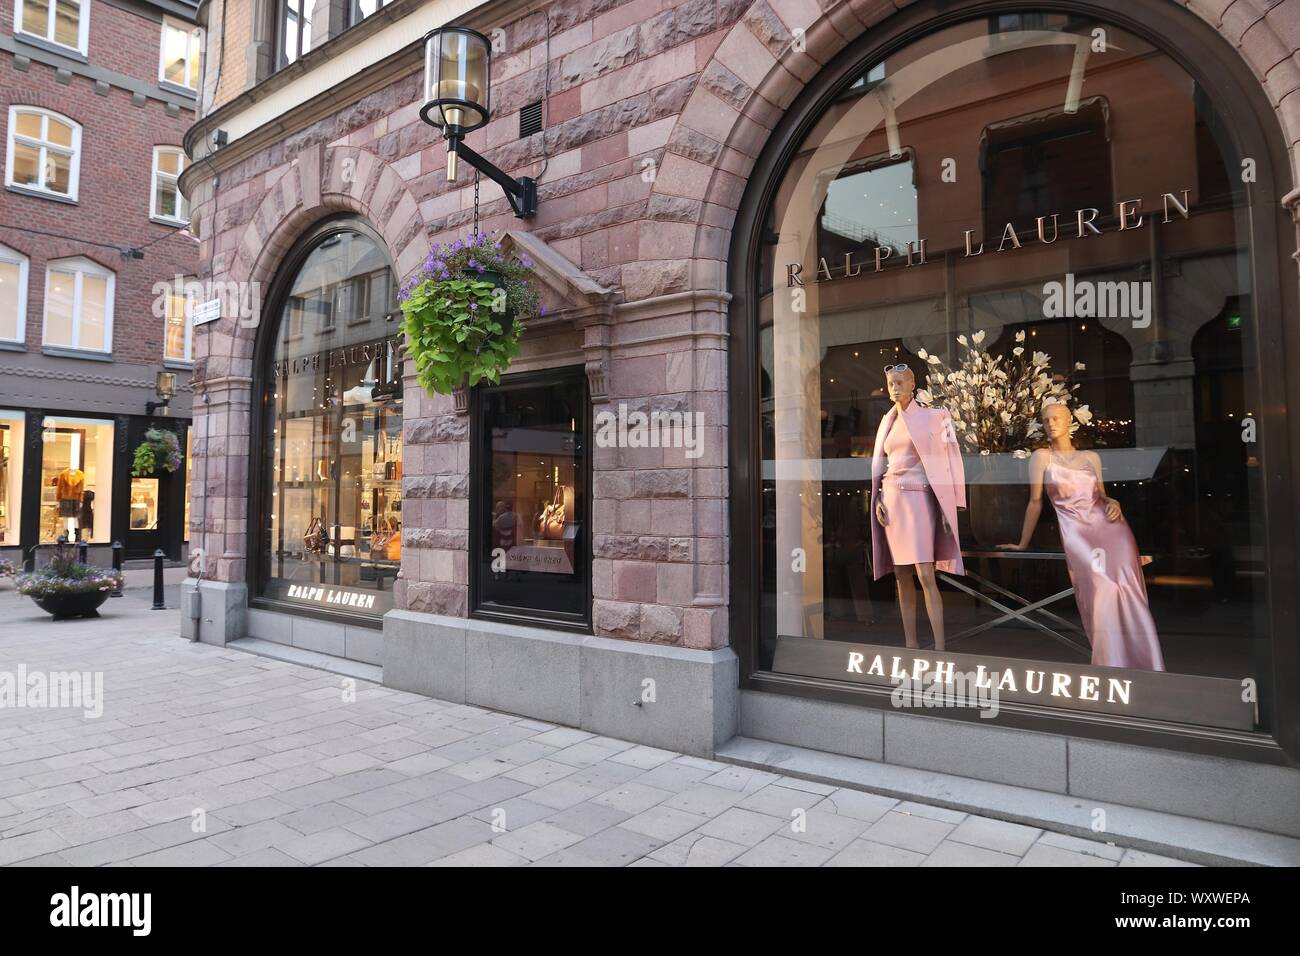 STOCKHOLM, SWEDEN - AUGUST 22, 2018: Ralph Lauren fashion store in Stockholm,  Sweden. Ralph Lauren is an American apparel company founded in 1967 Stock  Photo - Alamy